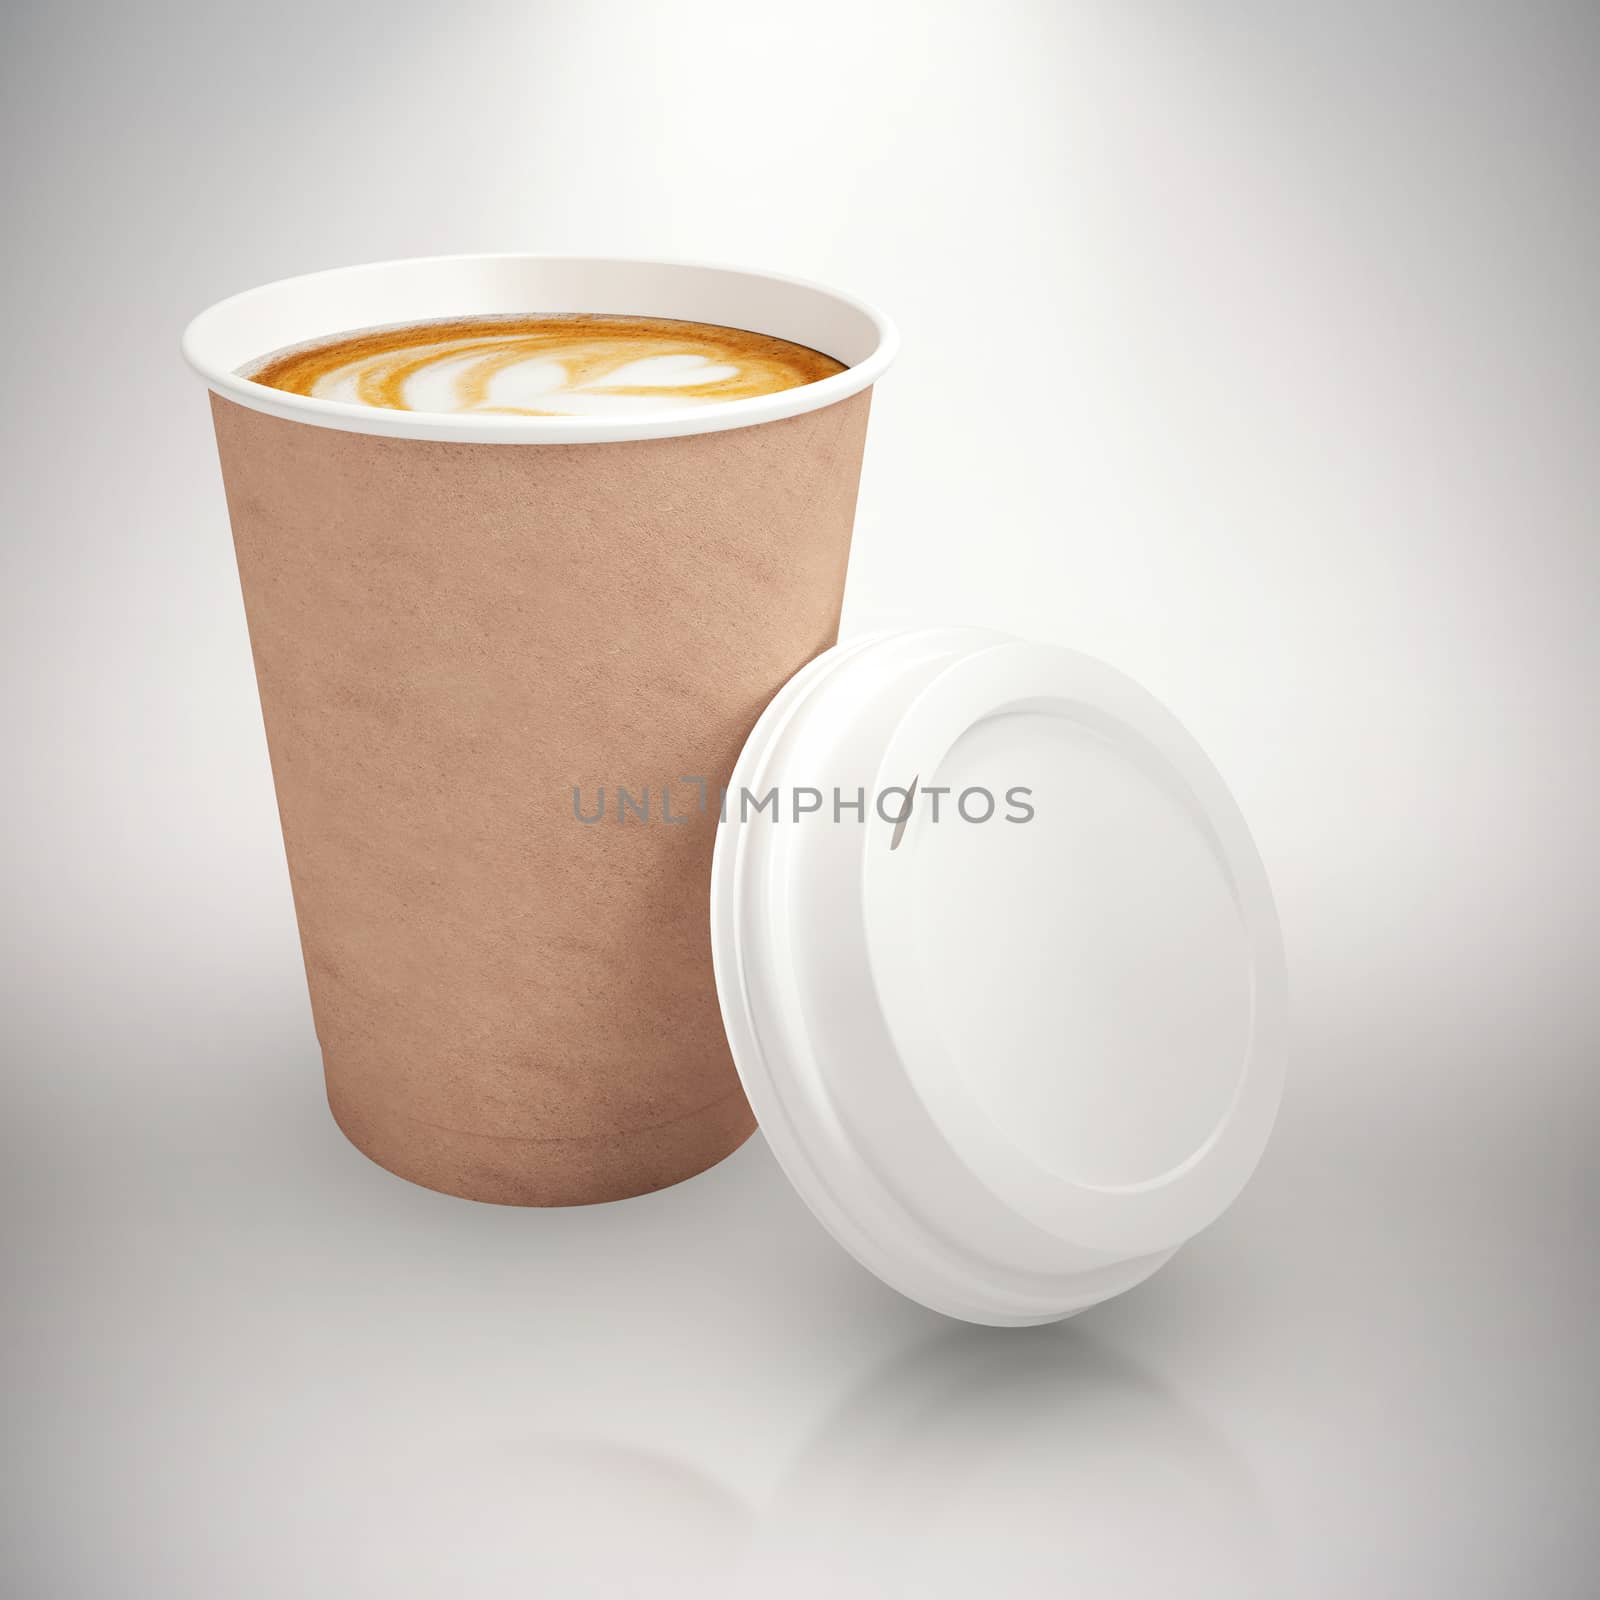 Coffee on brown cup over white background against grey background